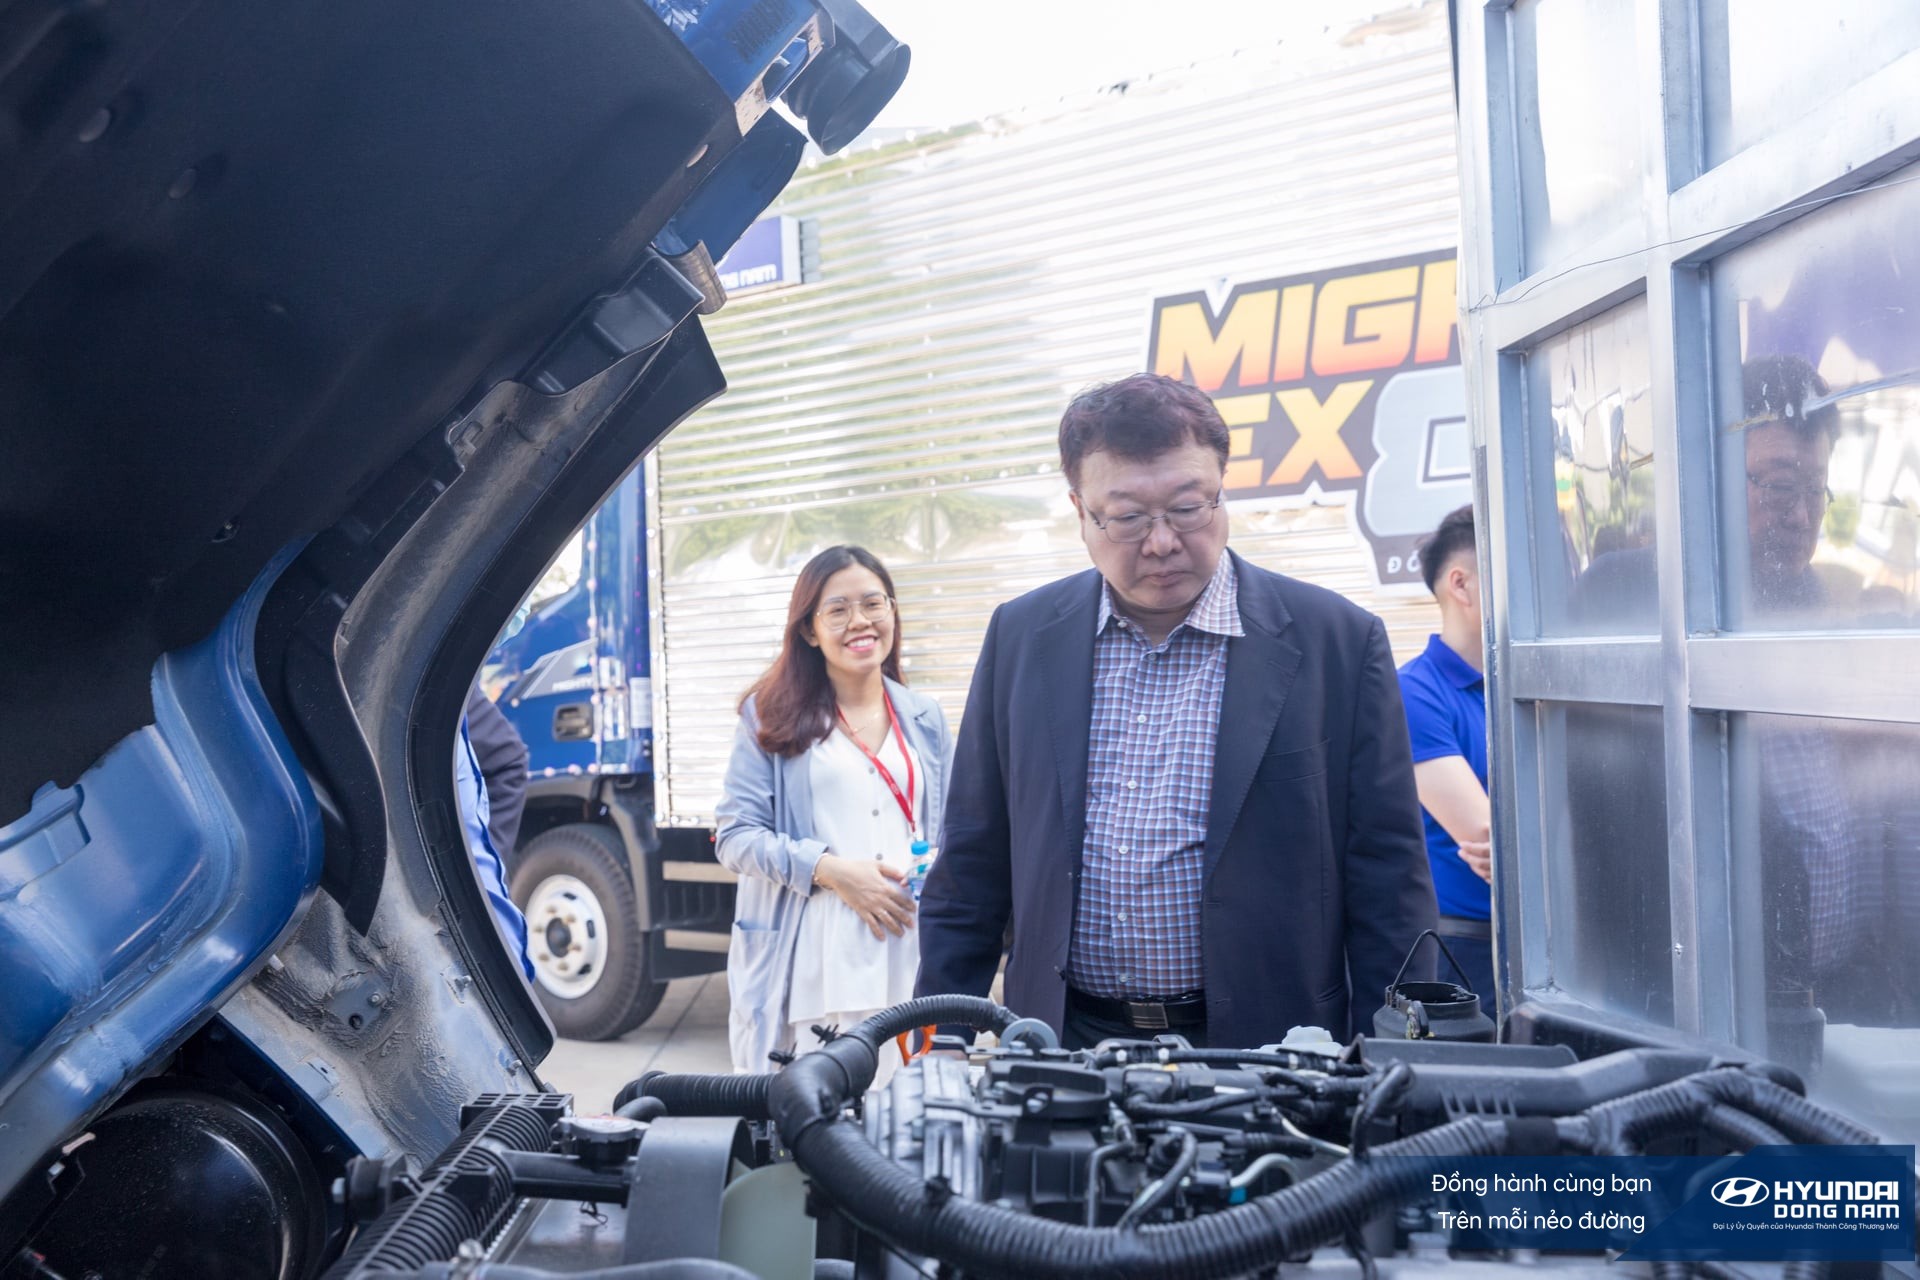 Fun Driving Ra mắt xe New Mighty EX8 GT (6)